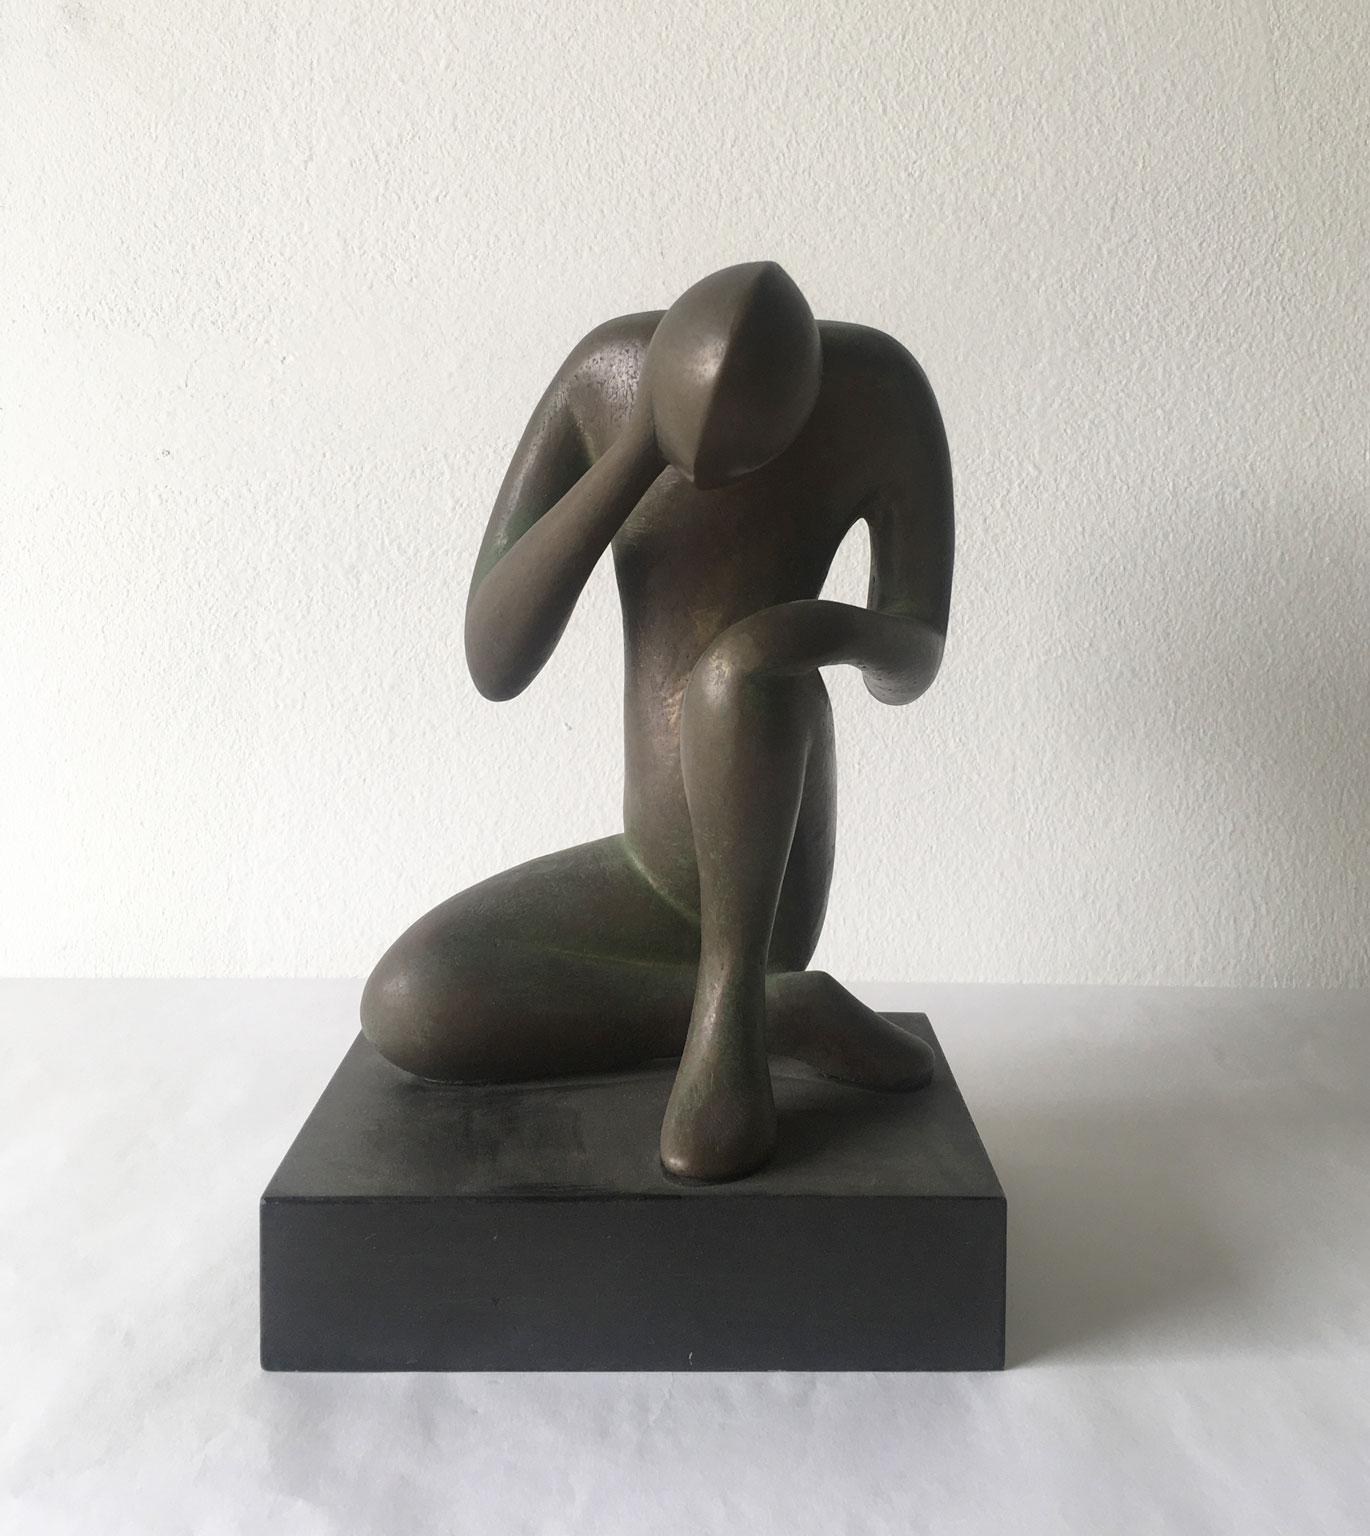 This is an intense bronze abstract sculpture and it was created by the Italian artist Andrea Picini.
The artwork is hand made by the technic of the lost wax bronze and it has a black wooden basement. The title is 